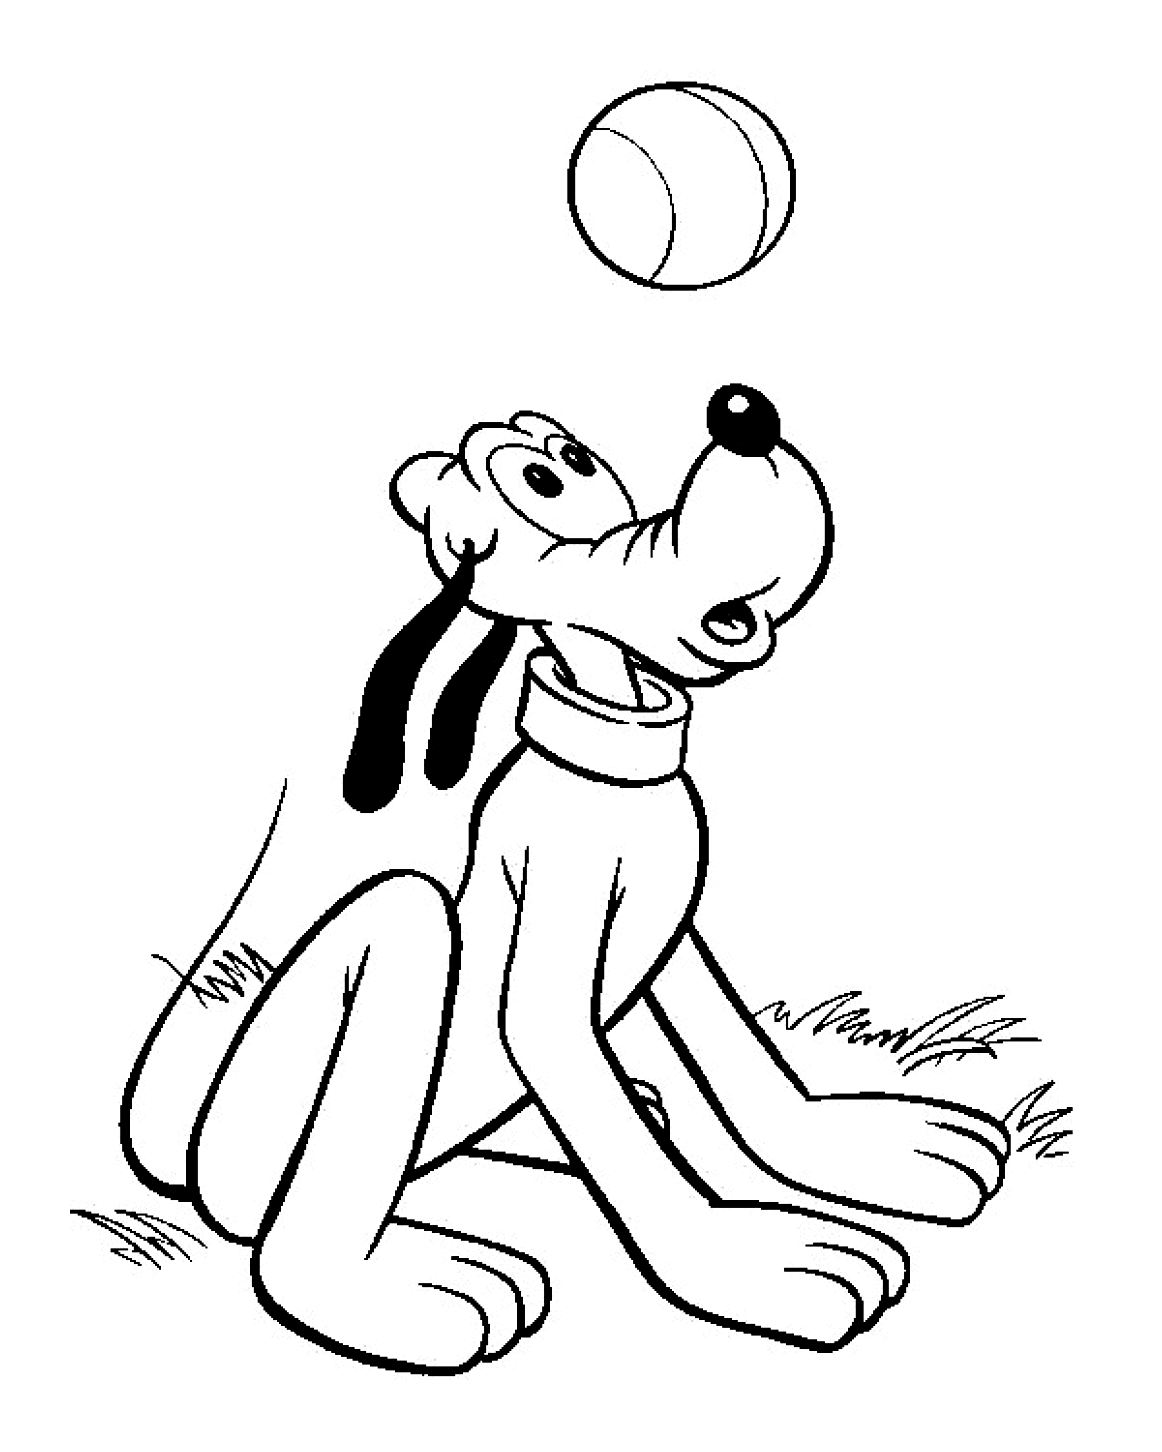 Simple coloring of Pluto